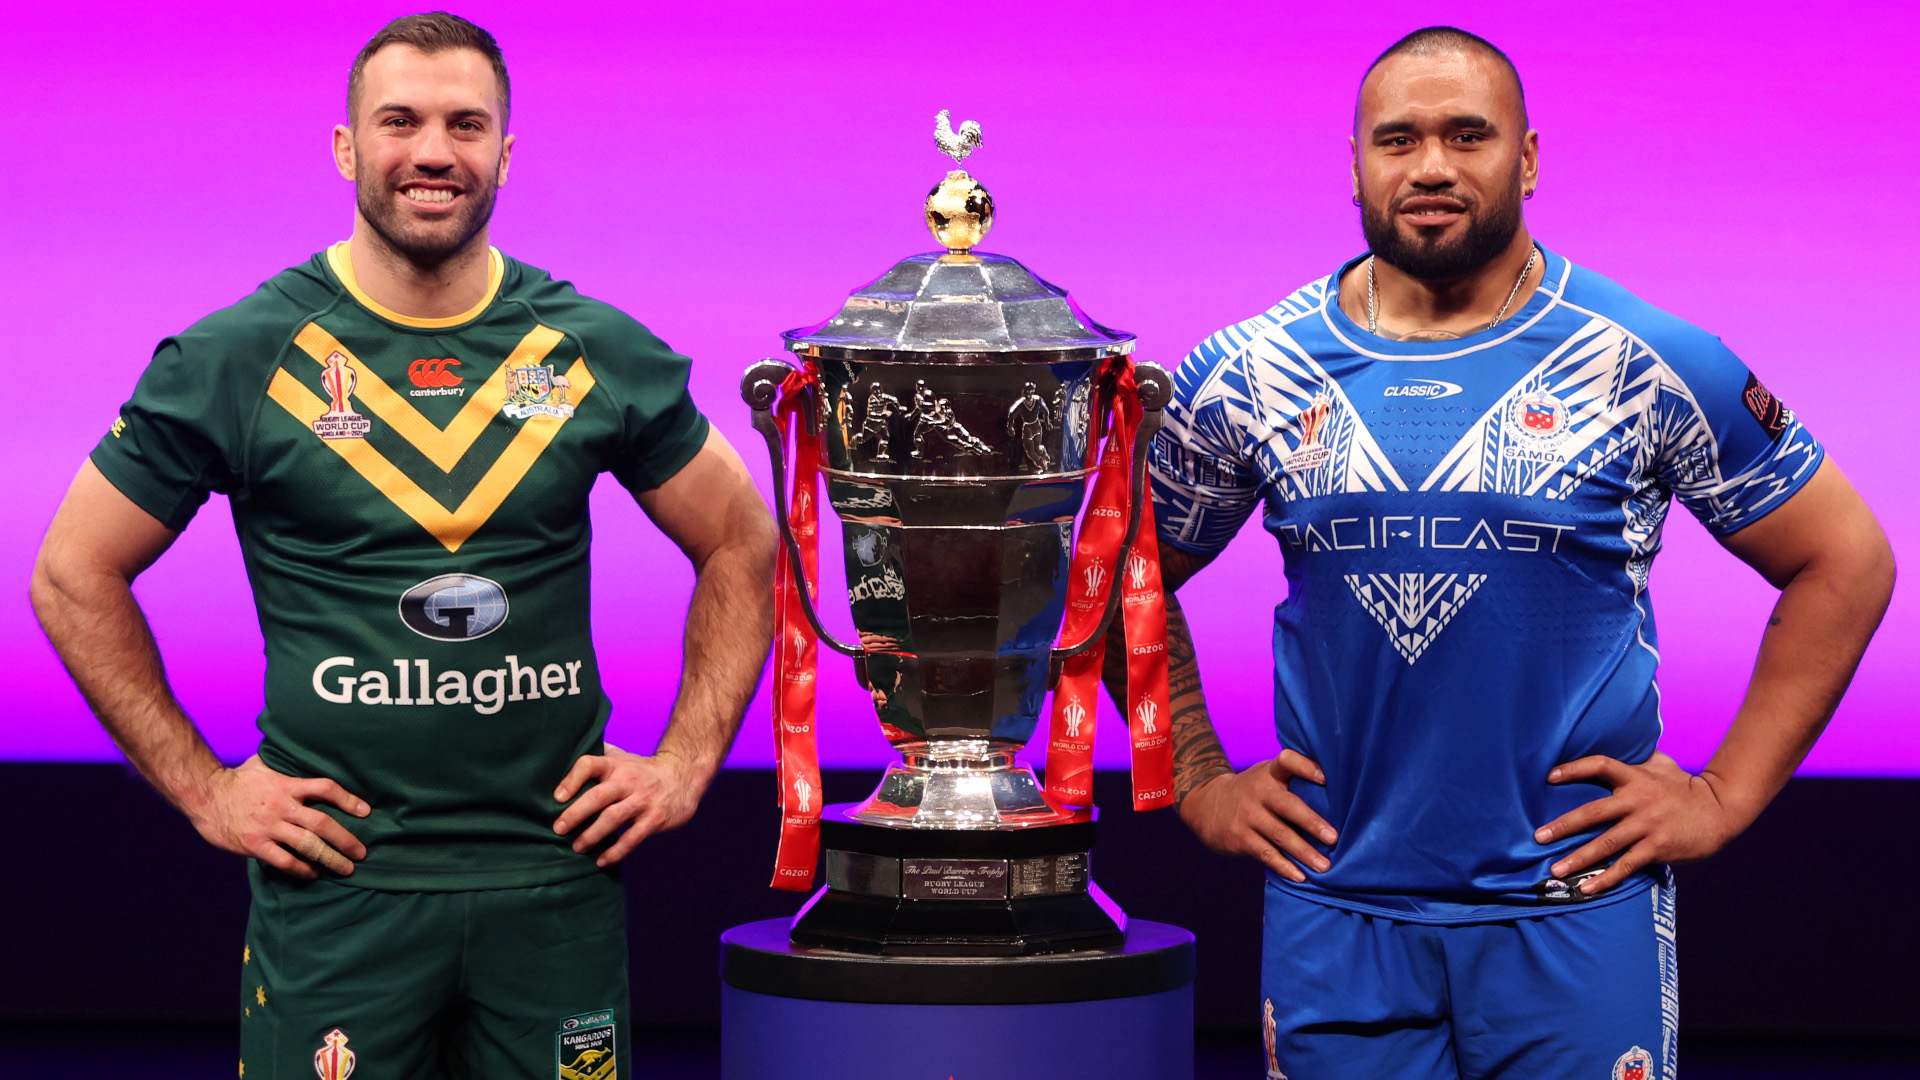 Australia vs Samoa live stream how to watch Rugby League World Cup final online and on TV from anywhere today TechRadar